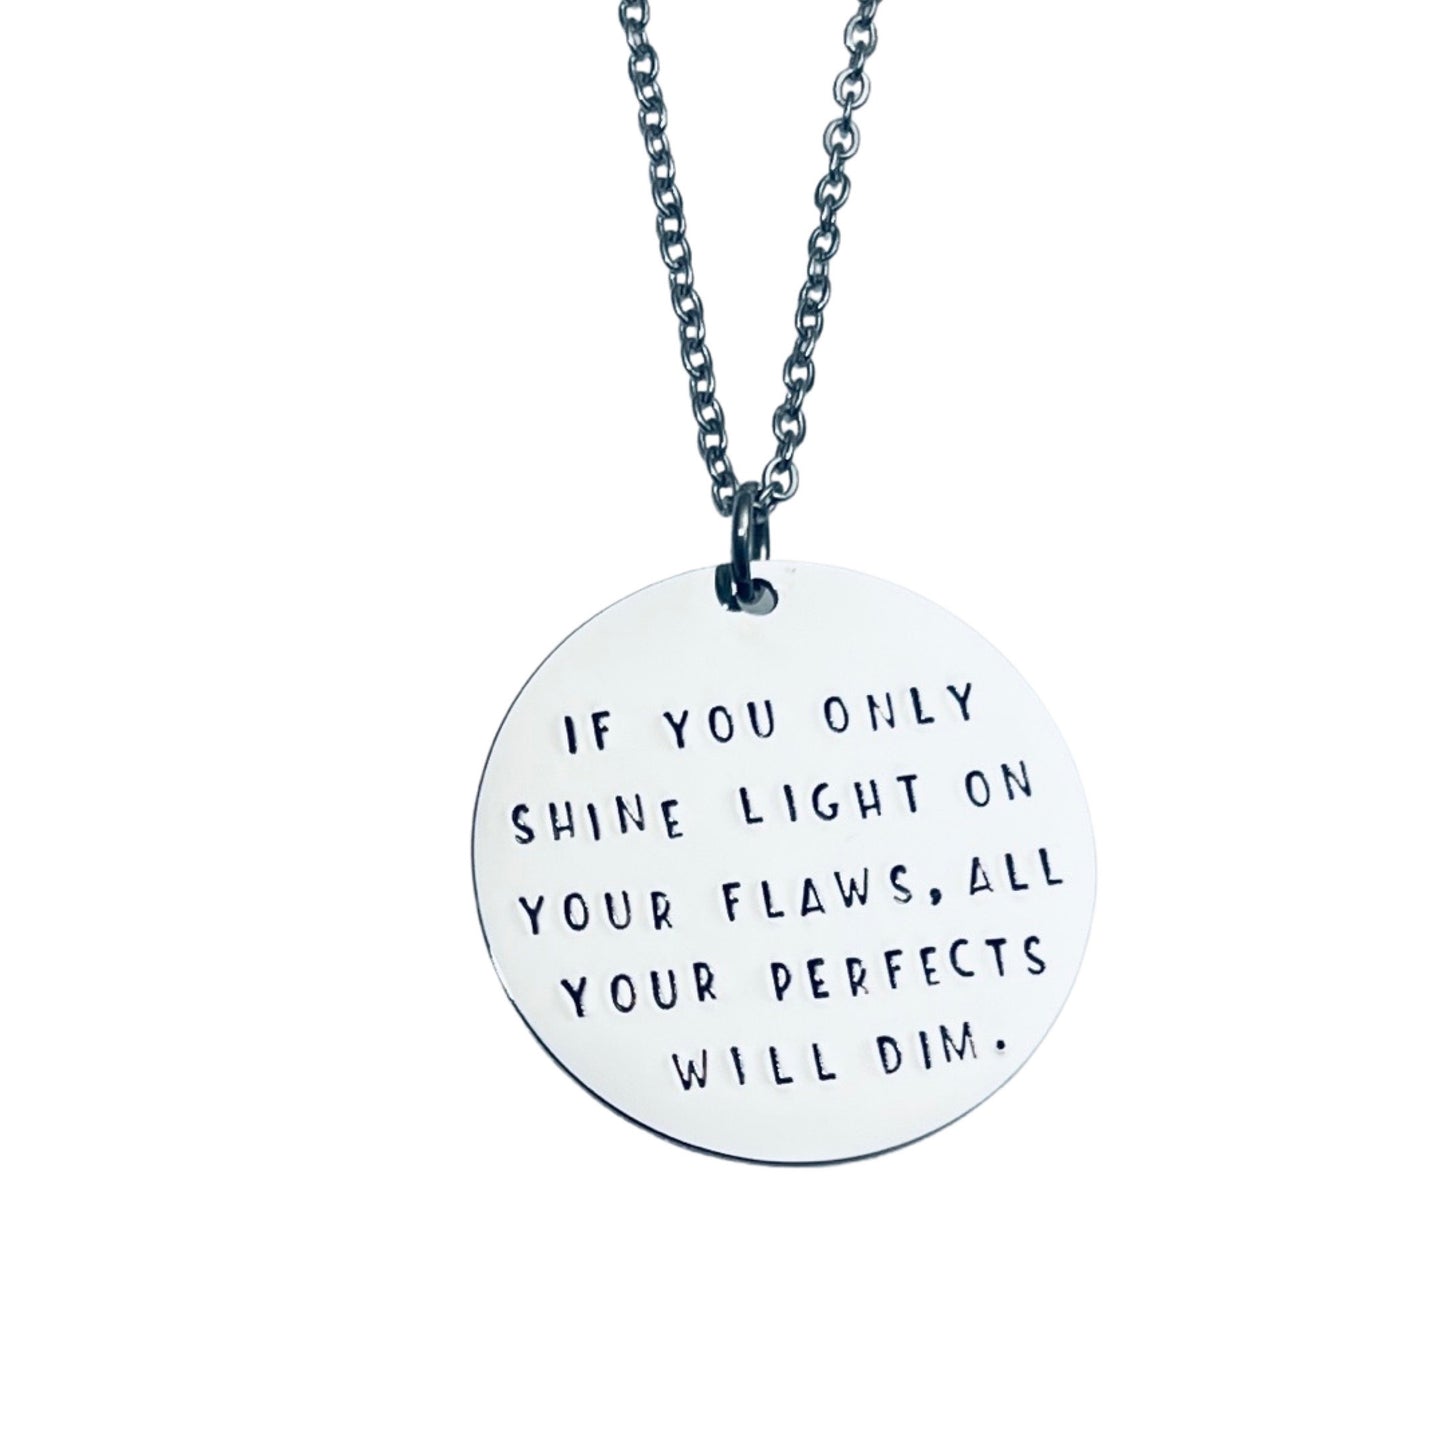 All Your Perfects necklace